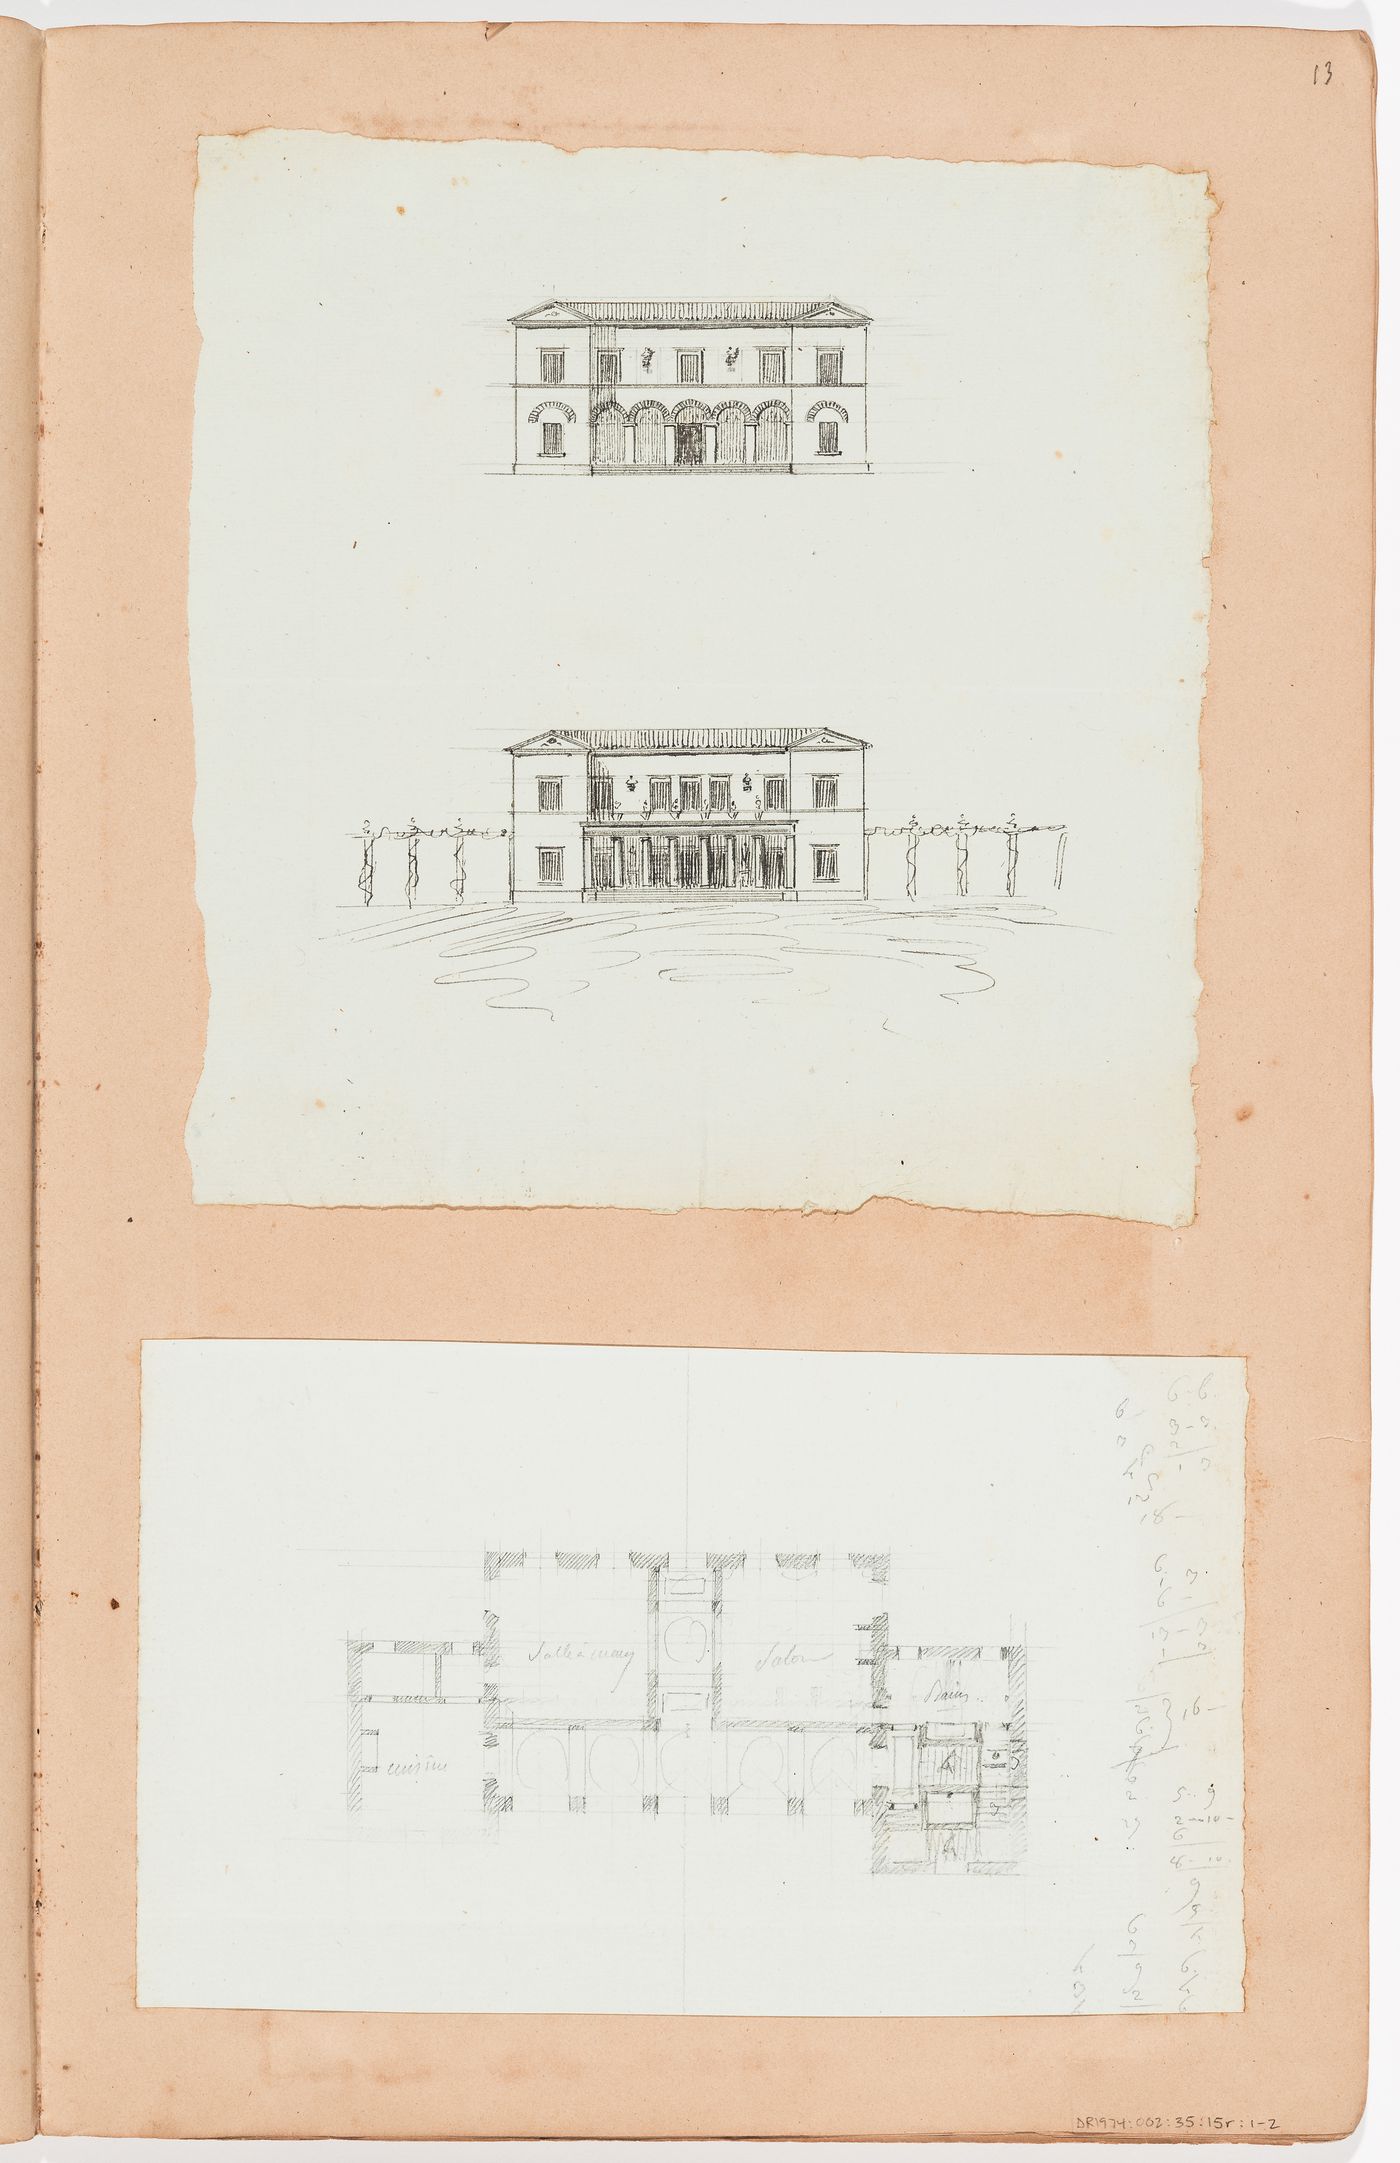 Elevations and ground floor plan for a country house; verso: Sketch plans for a country house(s)